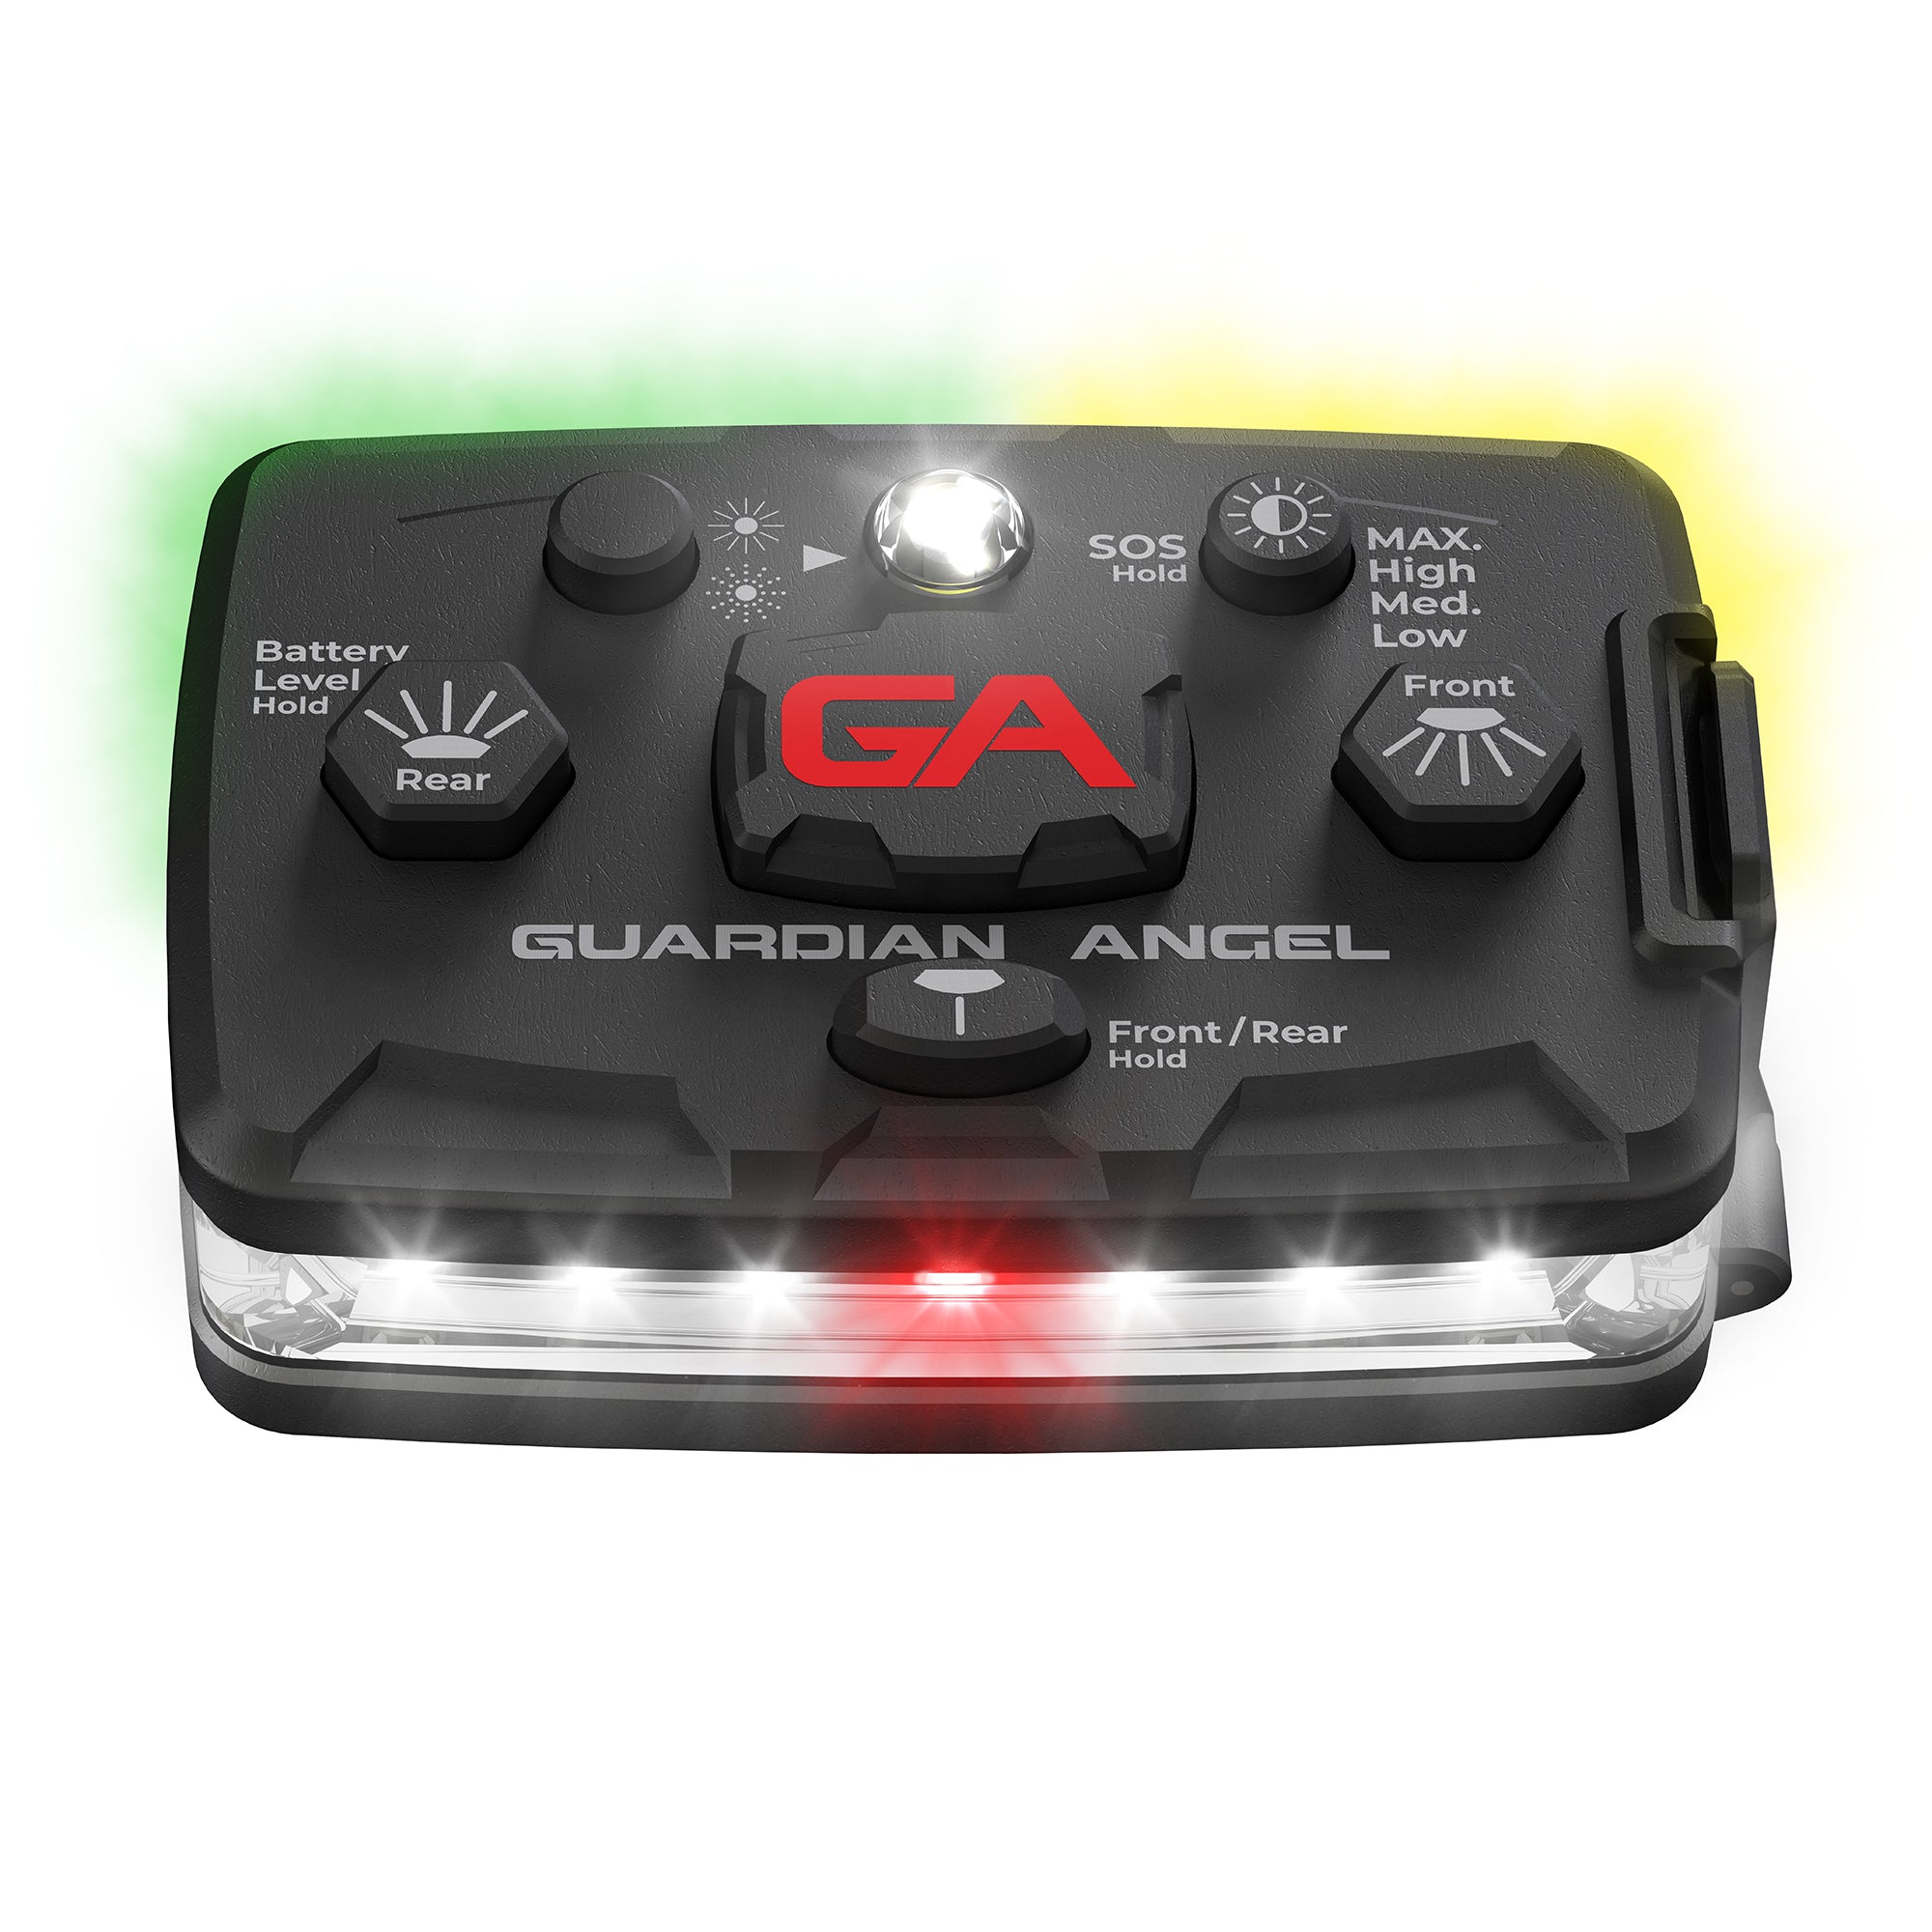 Guardian Angel Elite White/Green & Yellow Wearable Safety Light (ELT-W/GY)